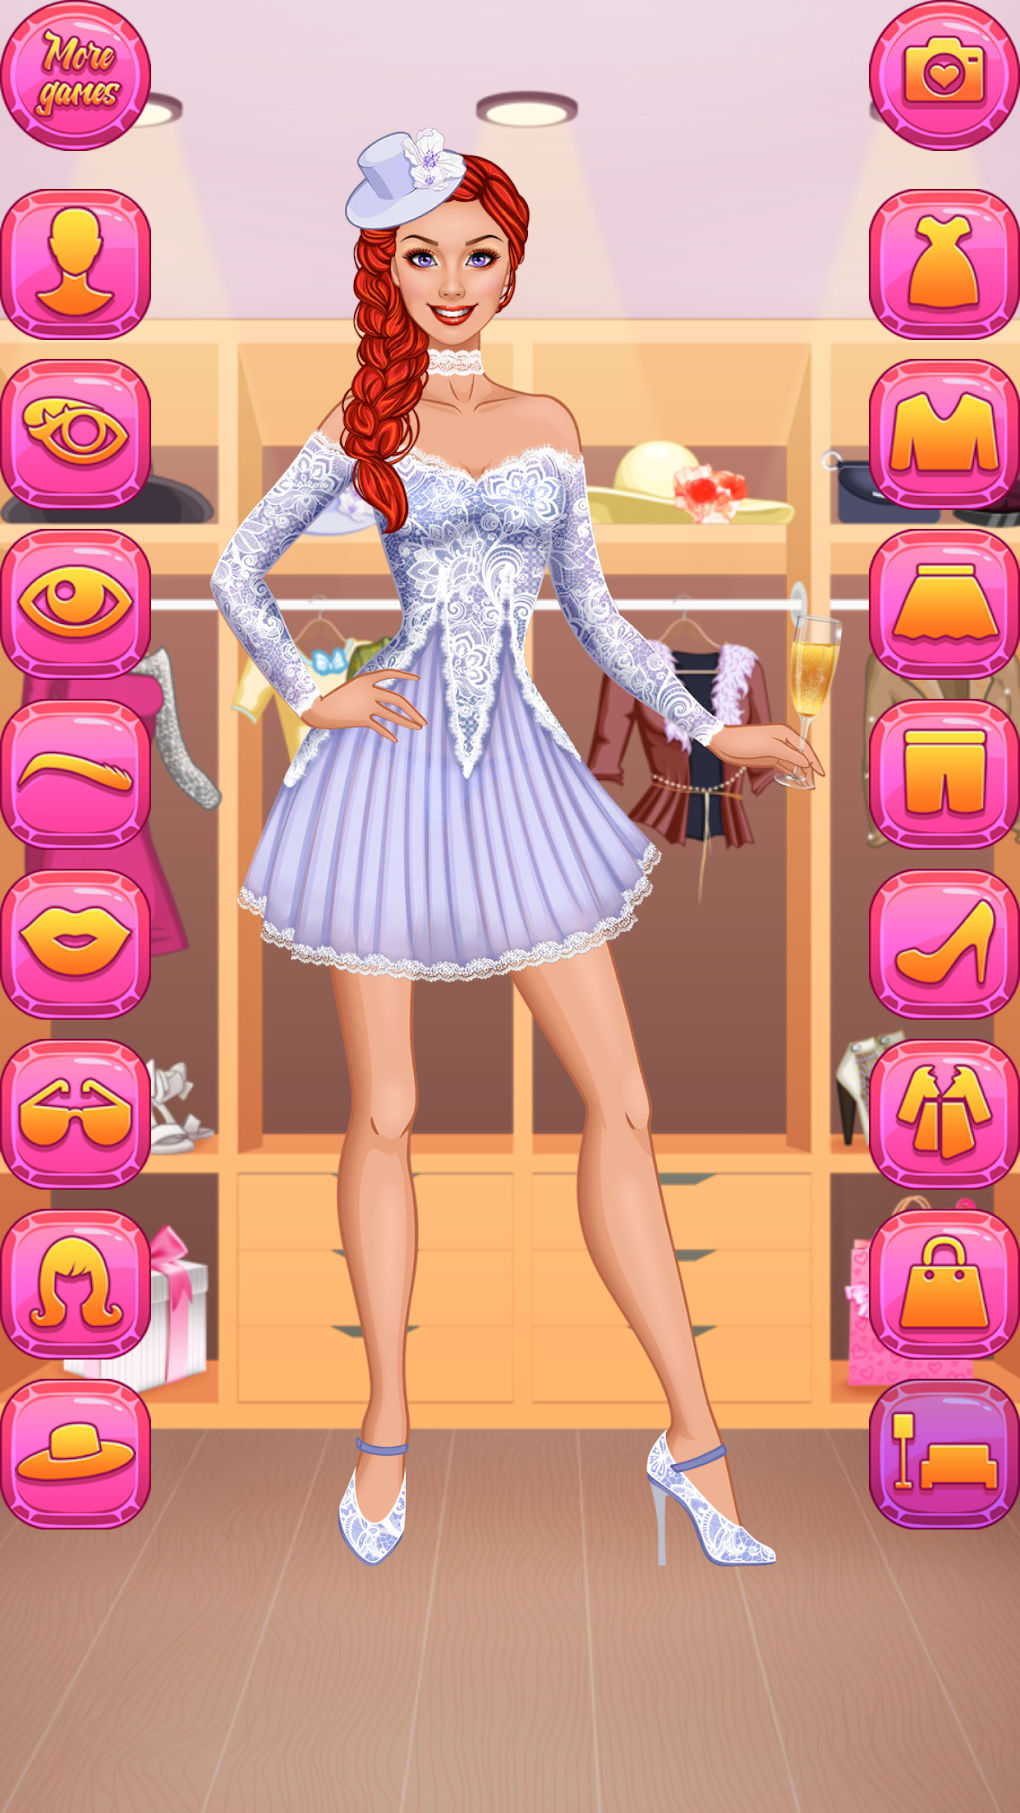 Fantasy Girl Dress Up by Makmie, game free online for girl dress up -  thirstymag.com